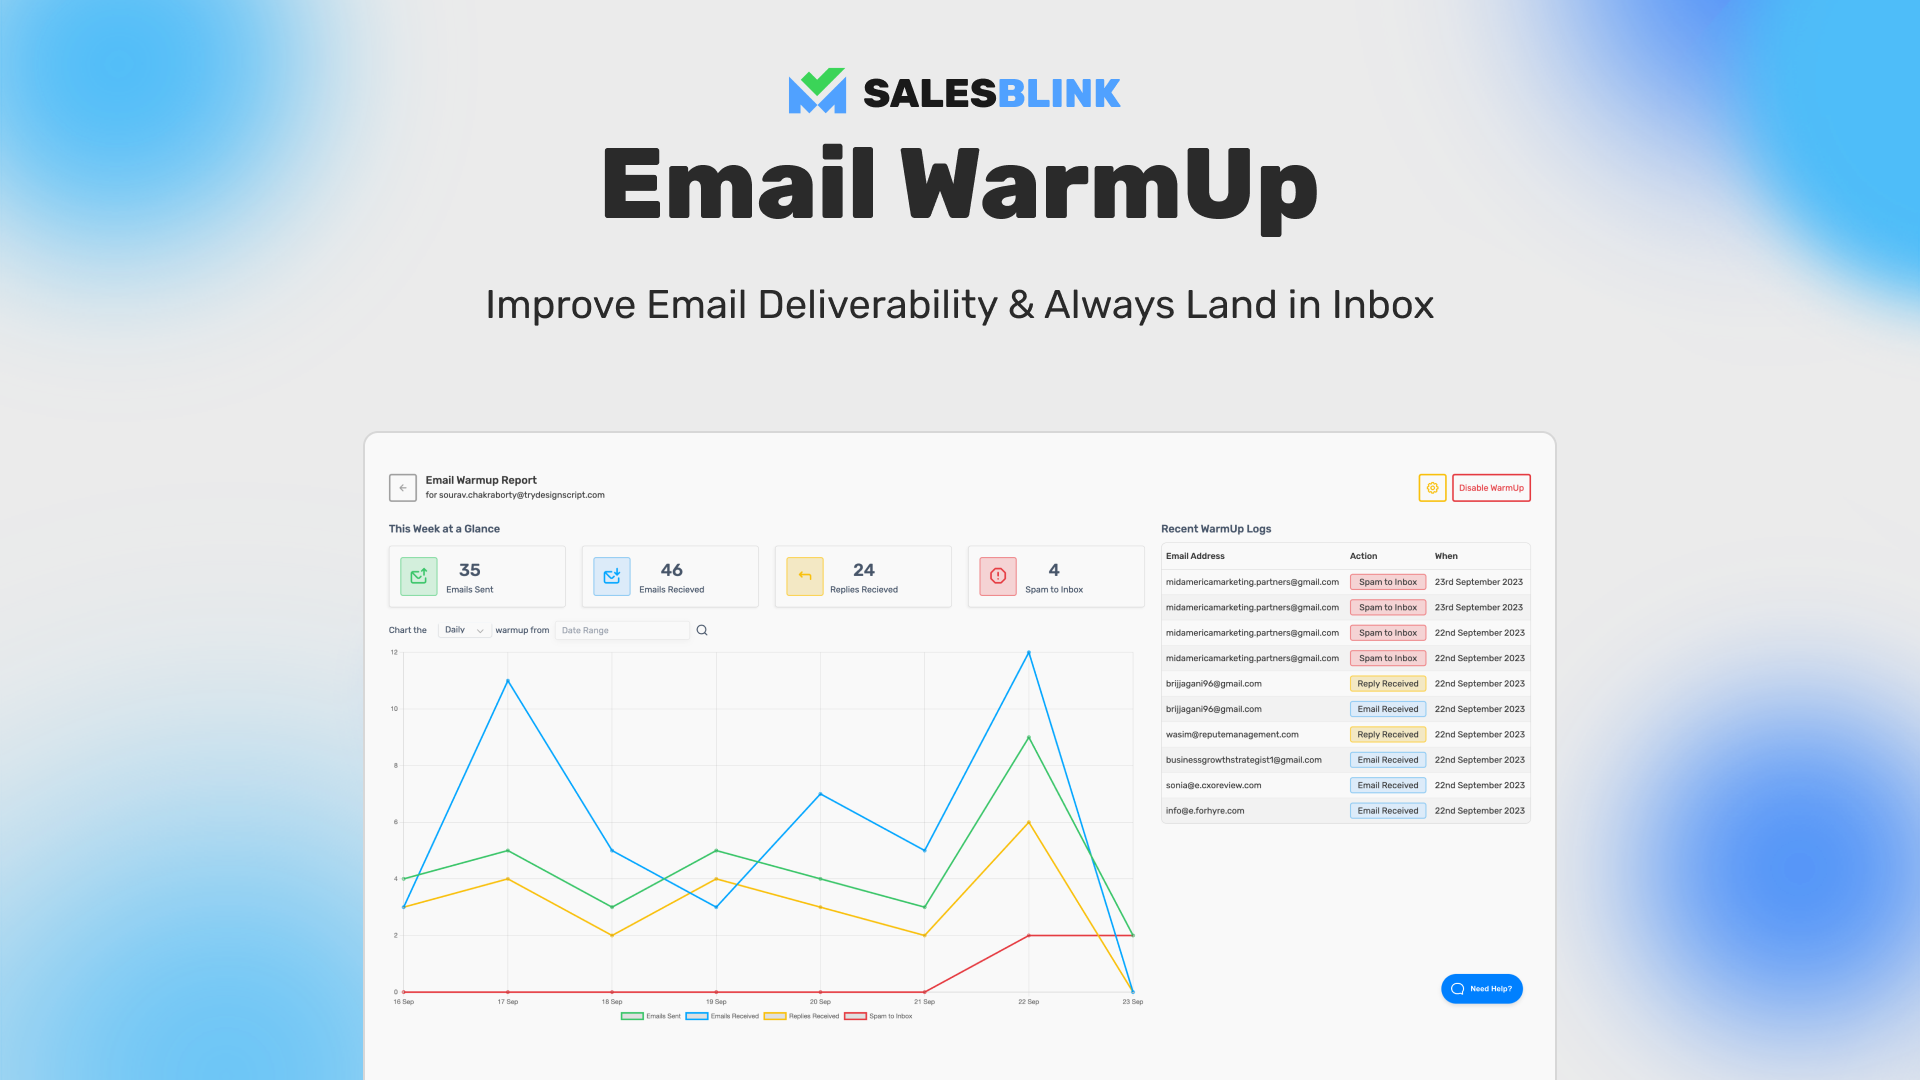 Always land in Inbox and Improve Deliverability with Email WarmUp